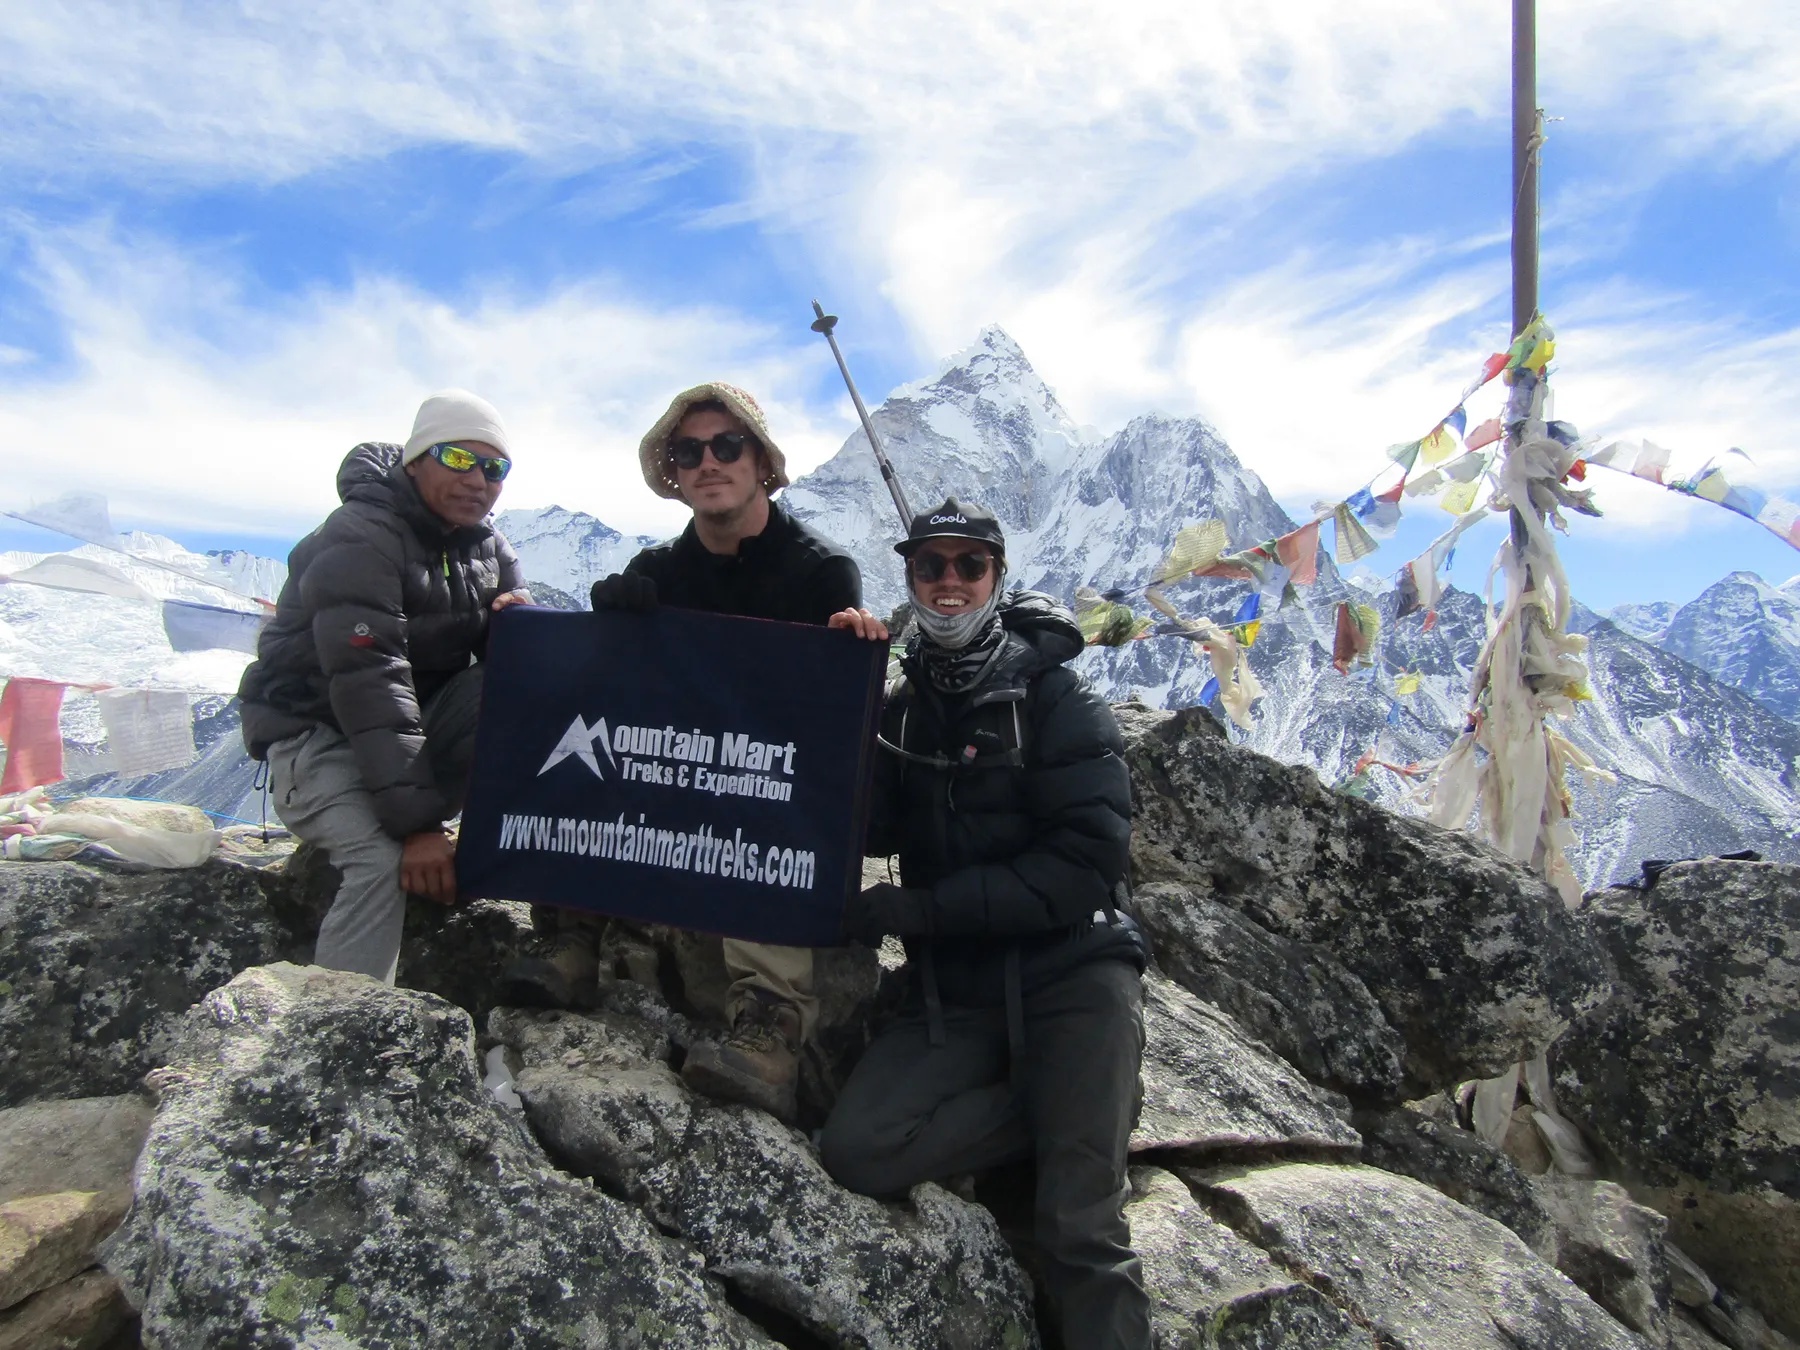 Everest base camp trek in December: Weather | Food | Drinks | Accommodation | Reason | Attraction